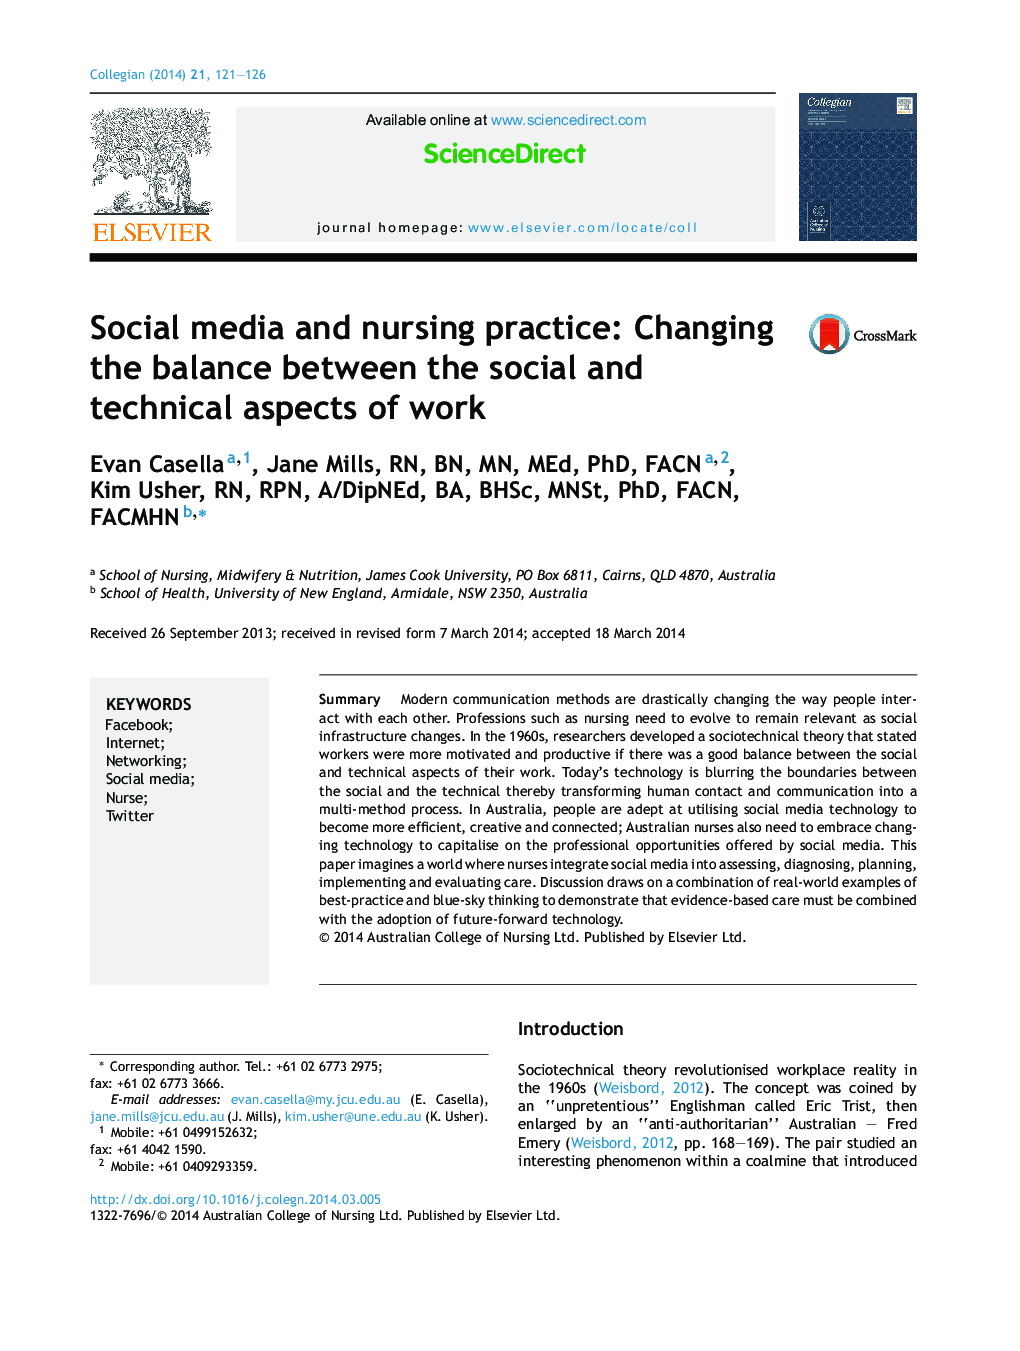 Social media and nursing practice: Changing the balance between the social and technical aspects of work